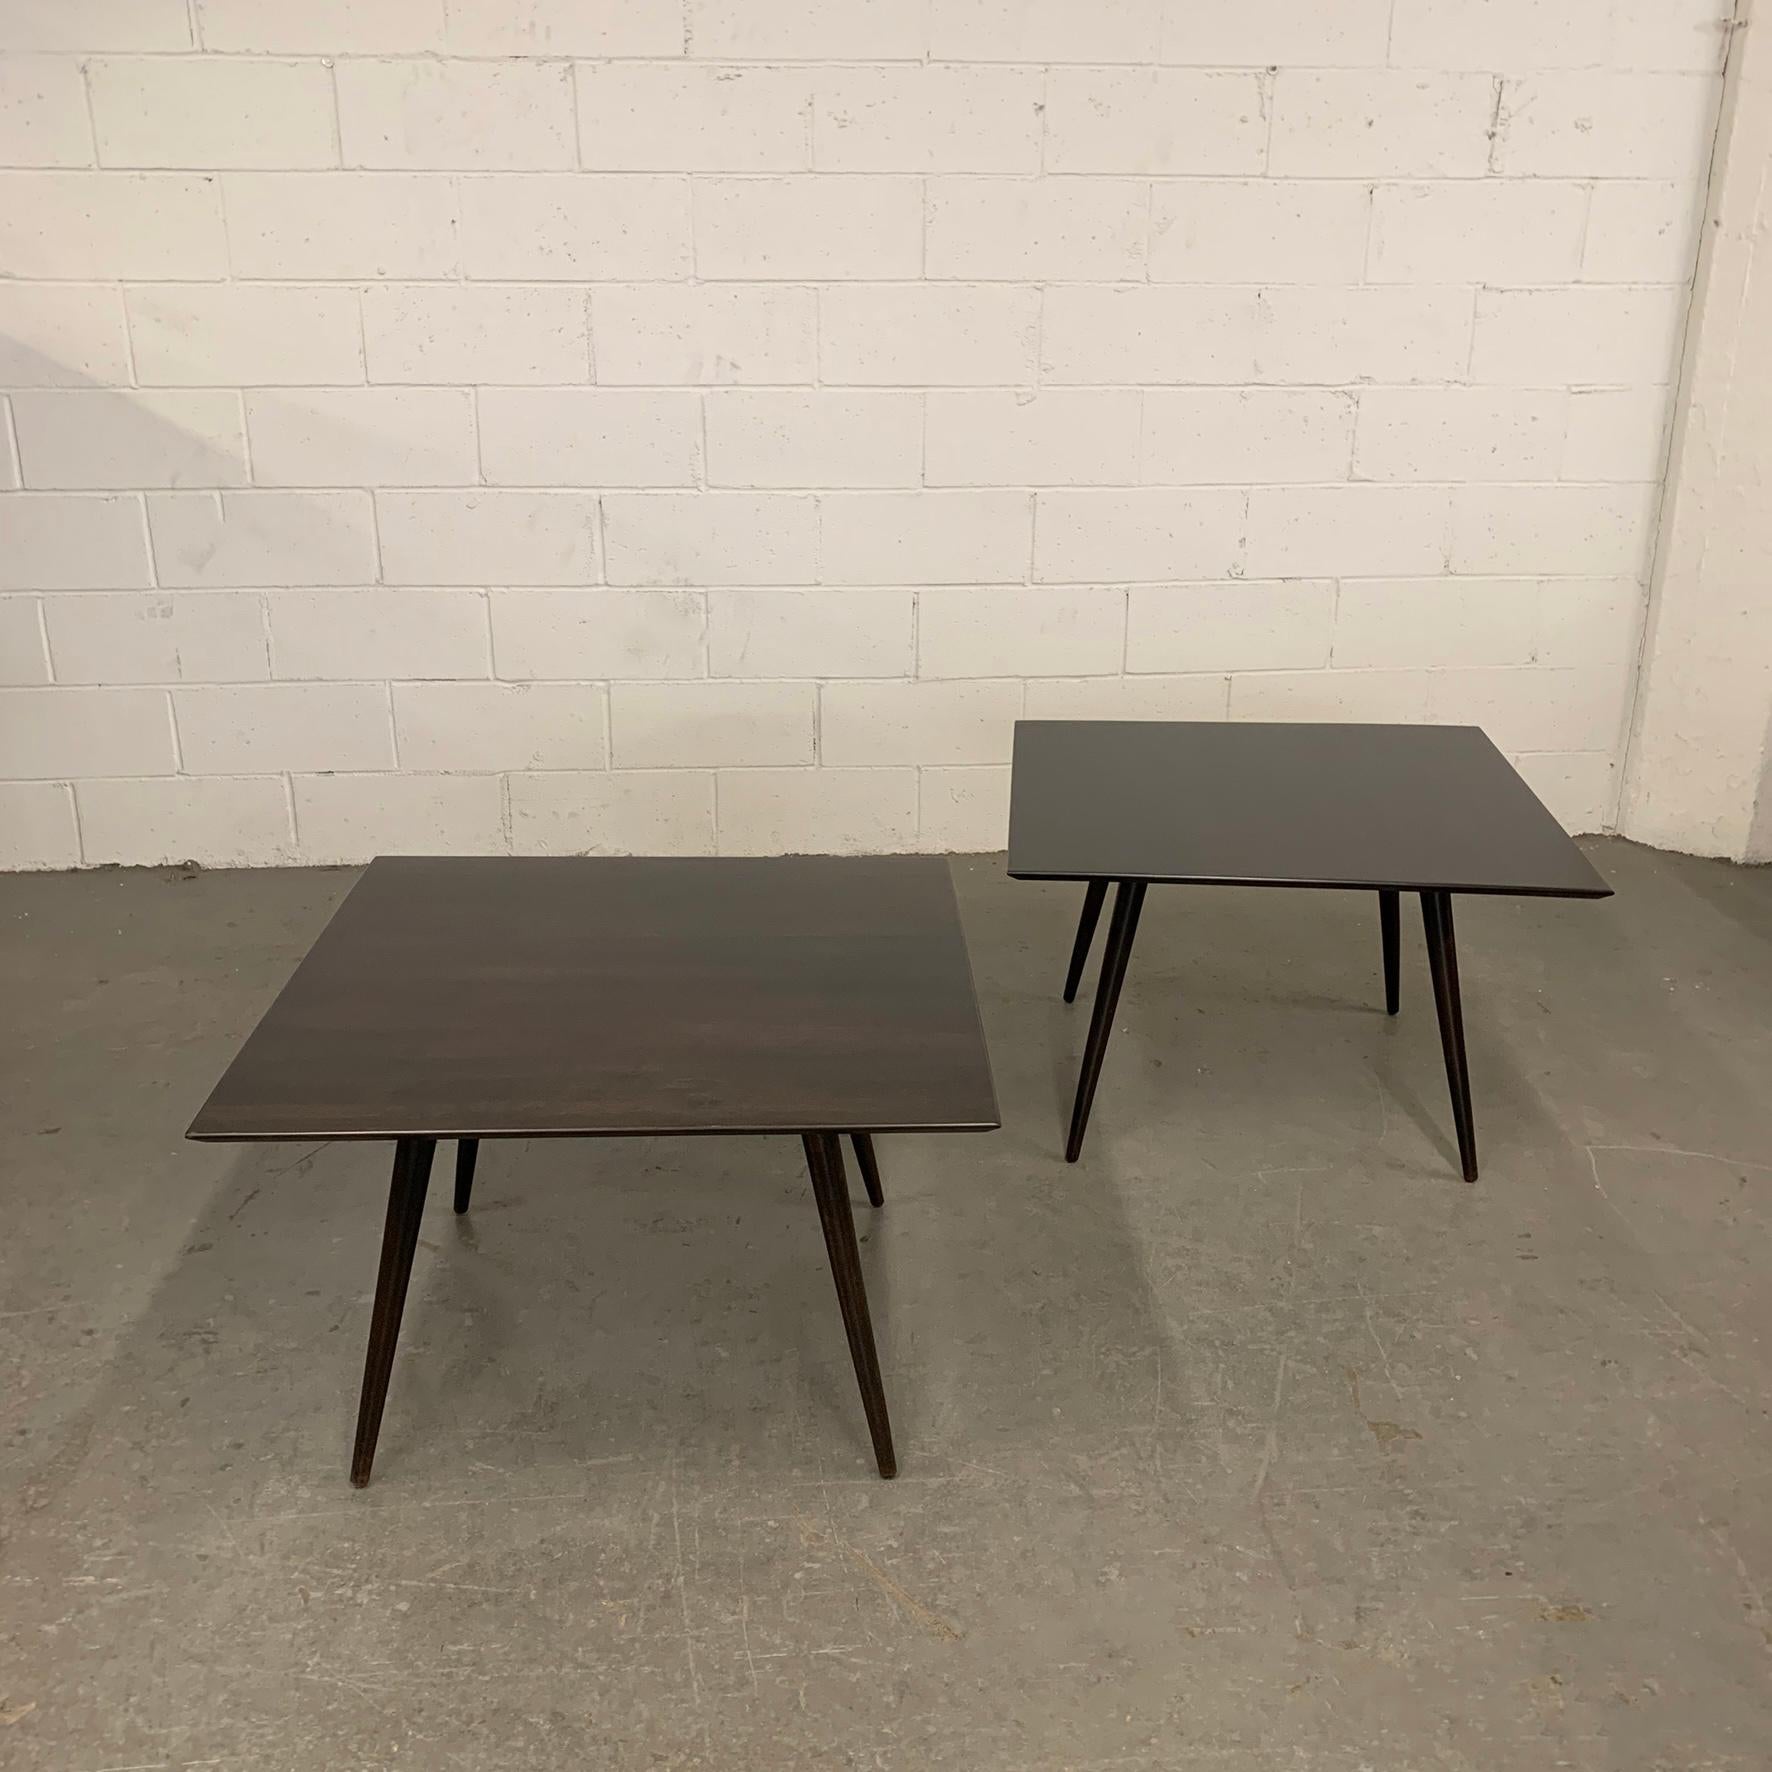 Mid-Century Modern, maple, coffee or side/end tables by Paul McCobb, Planner Group for Winchendon are newly ebonized.